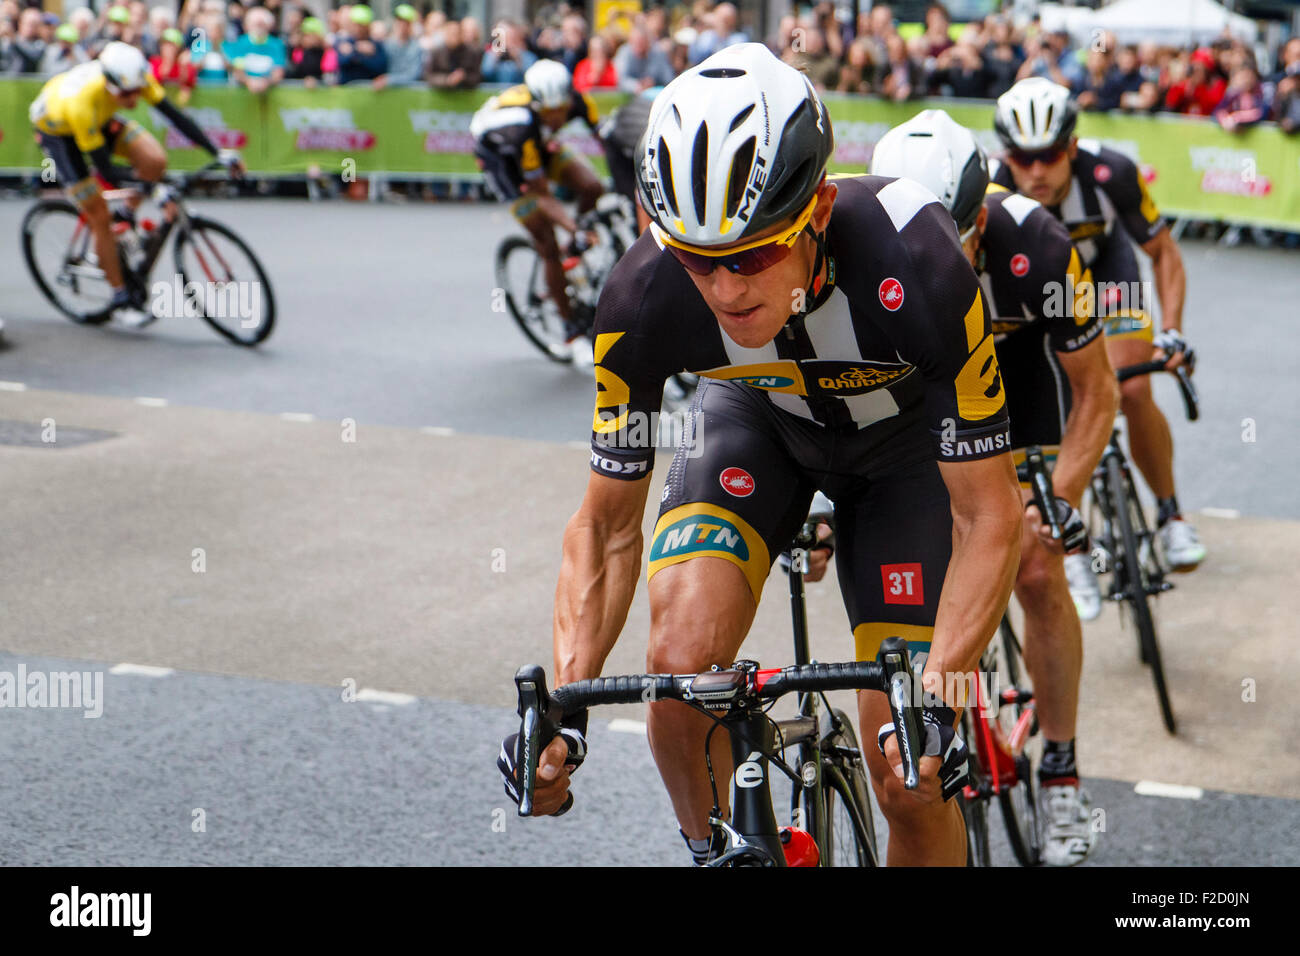 Serge Pauwels leads Team MTN-QHUBEKA during the final stage of the Tour of Britain 2015 cycle race, London, UK Stock Photo